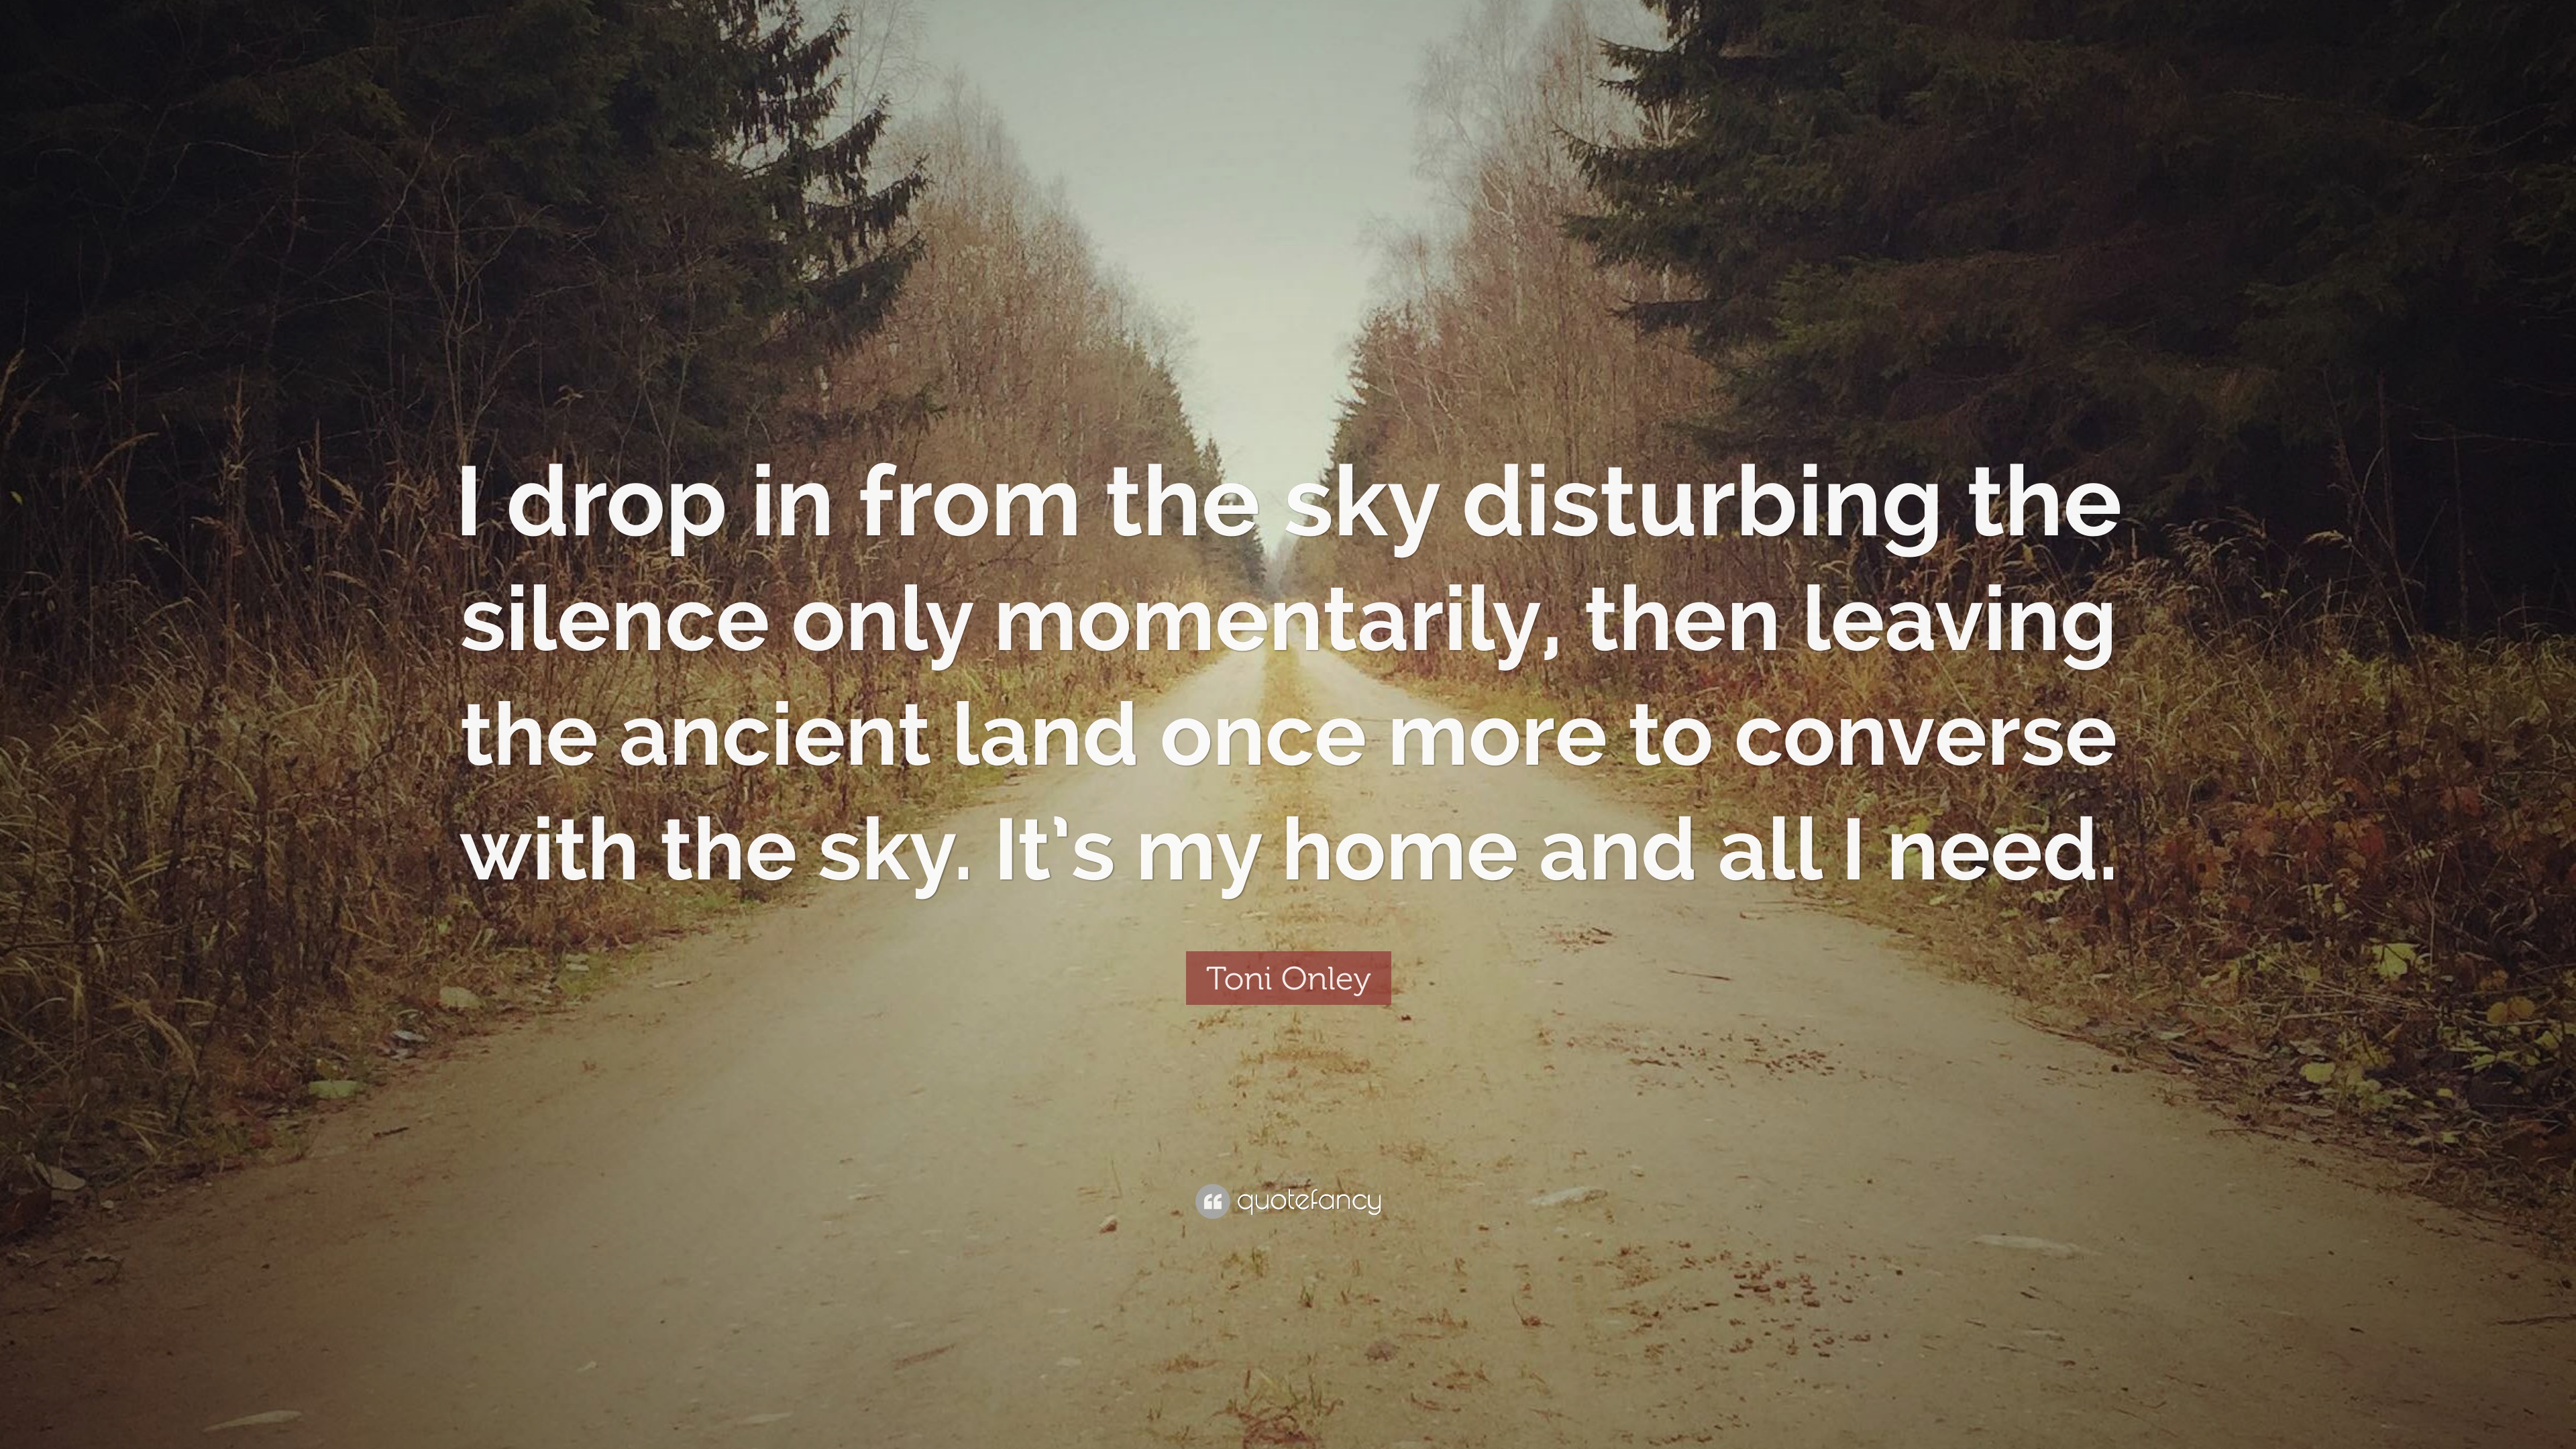 Toni Onley Quote: “I drop in from the sky disturbing the silence